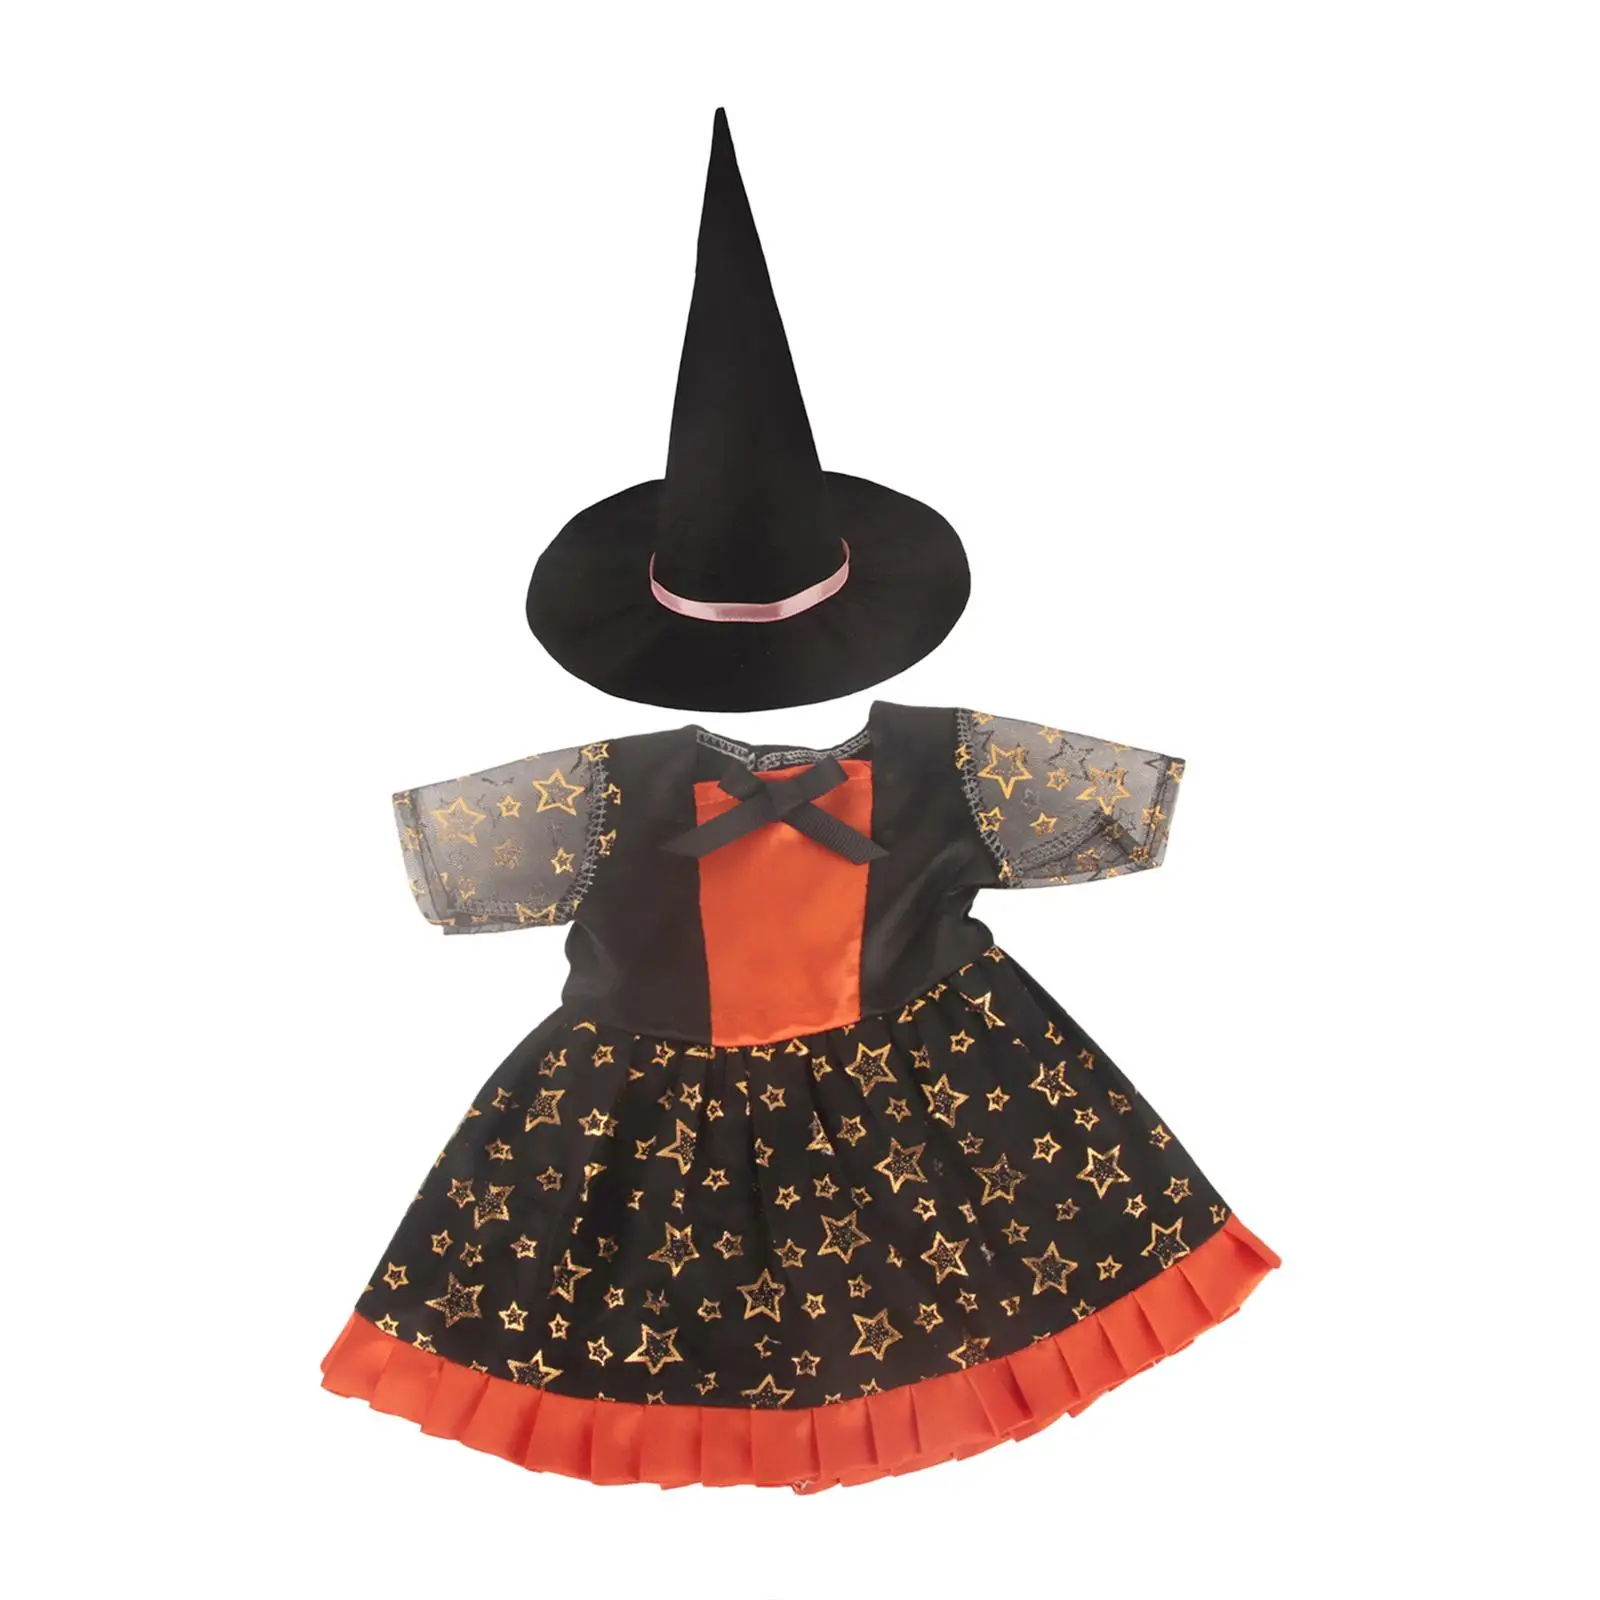 18 inch Girl Doll Dress Hat Fashion Doll Accessory Outfit for Everyday Play Role Playing Festival Activity Cosplay